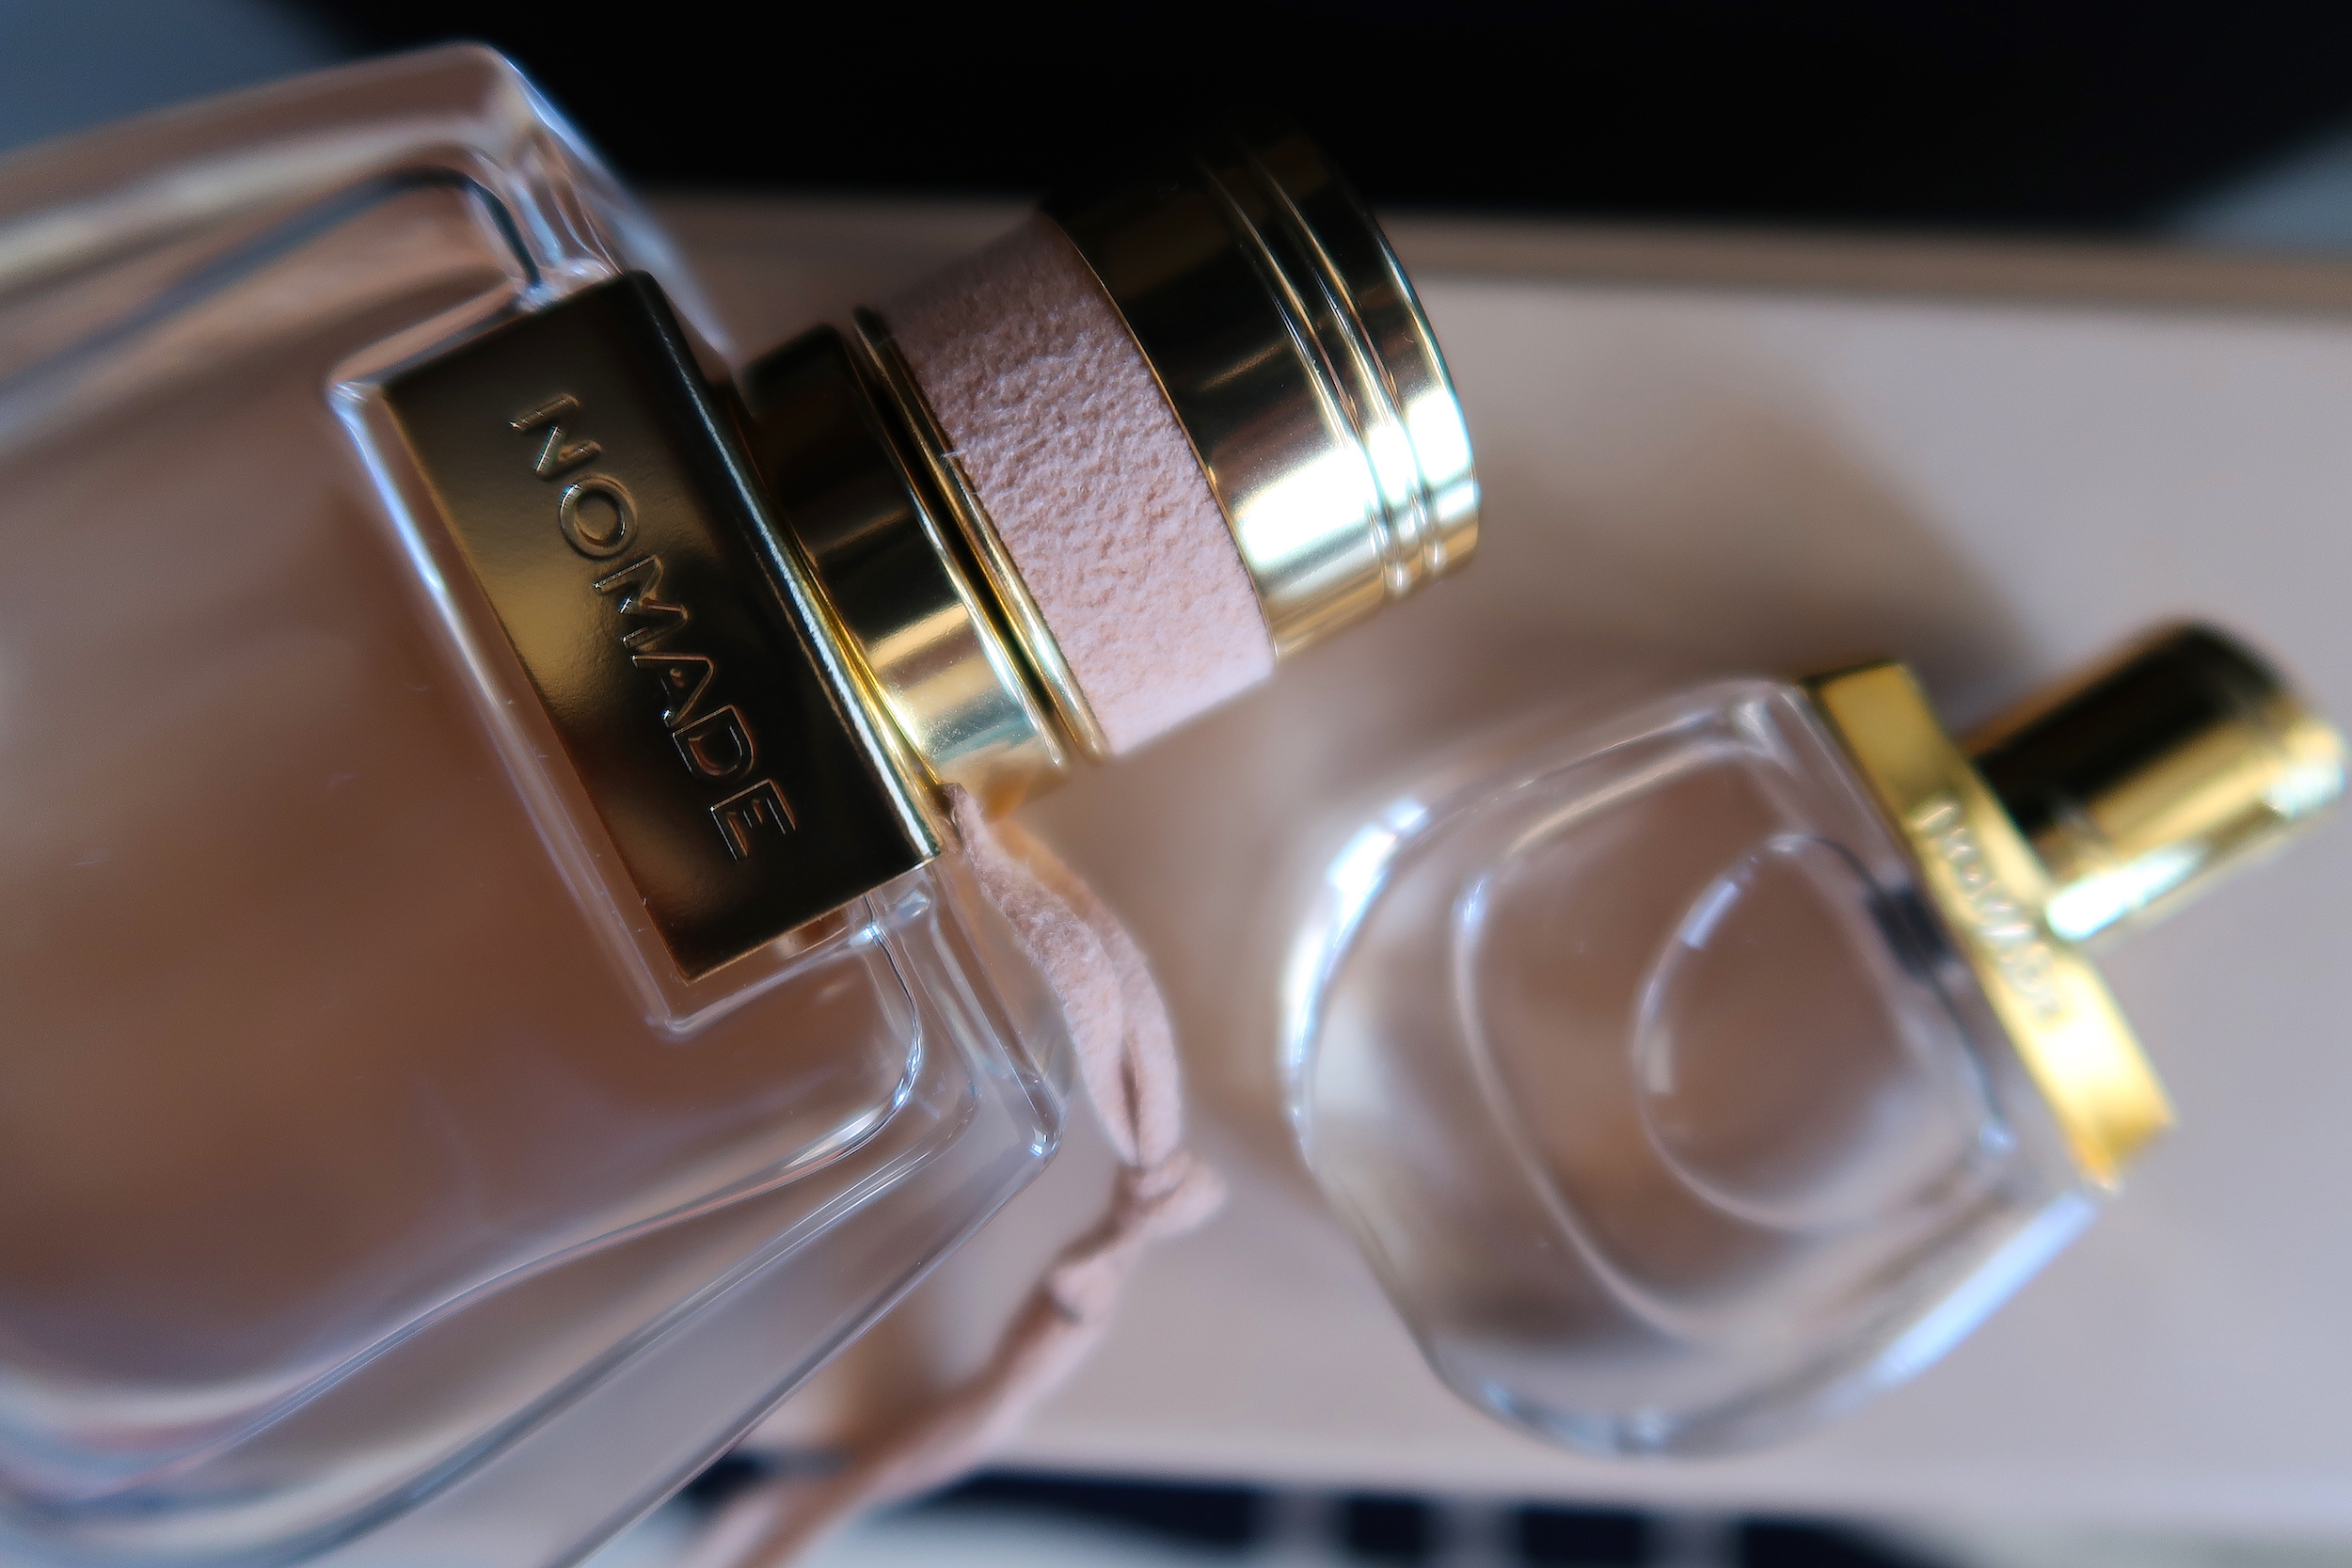 Chloé NOMADE NATURELLE PERFUME Review 